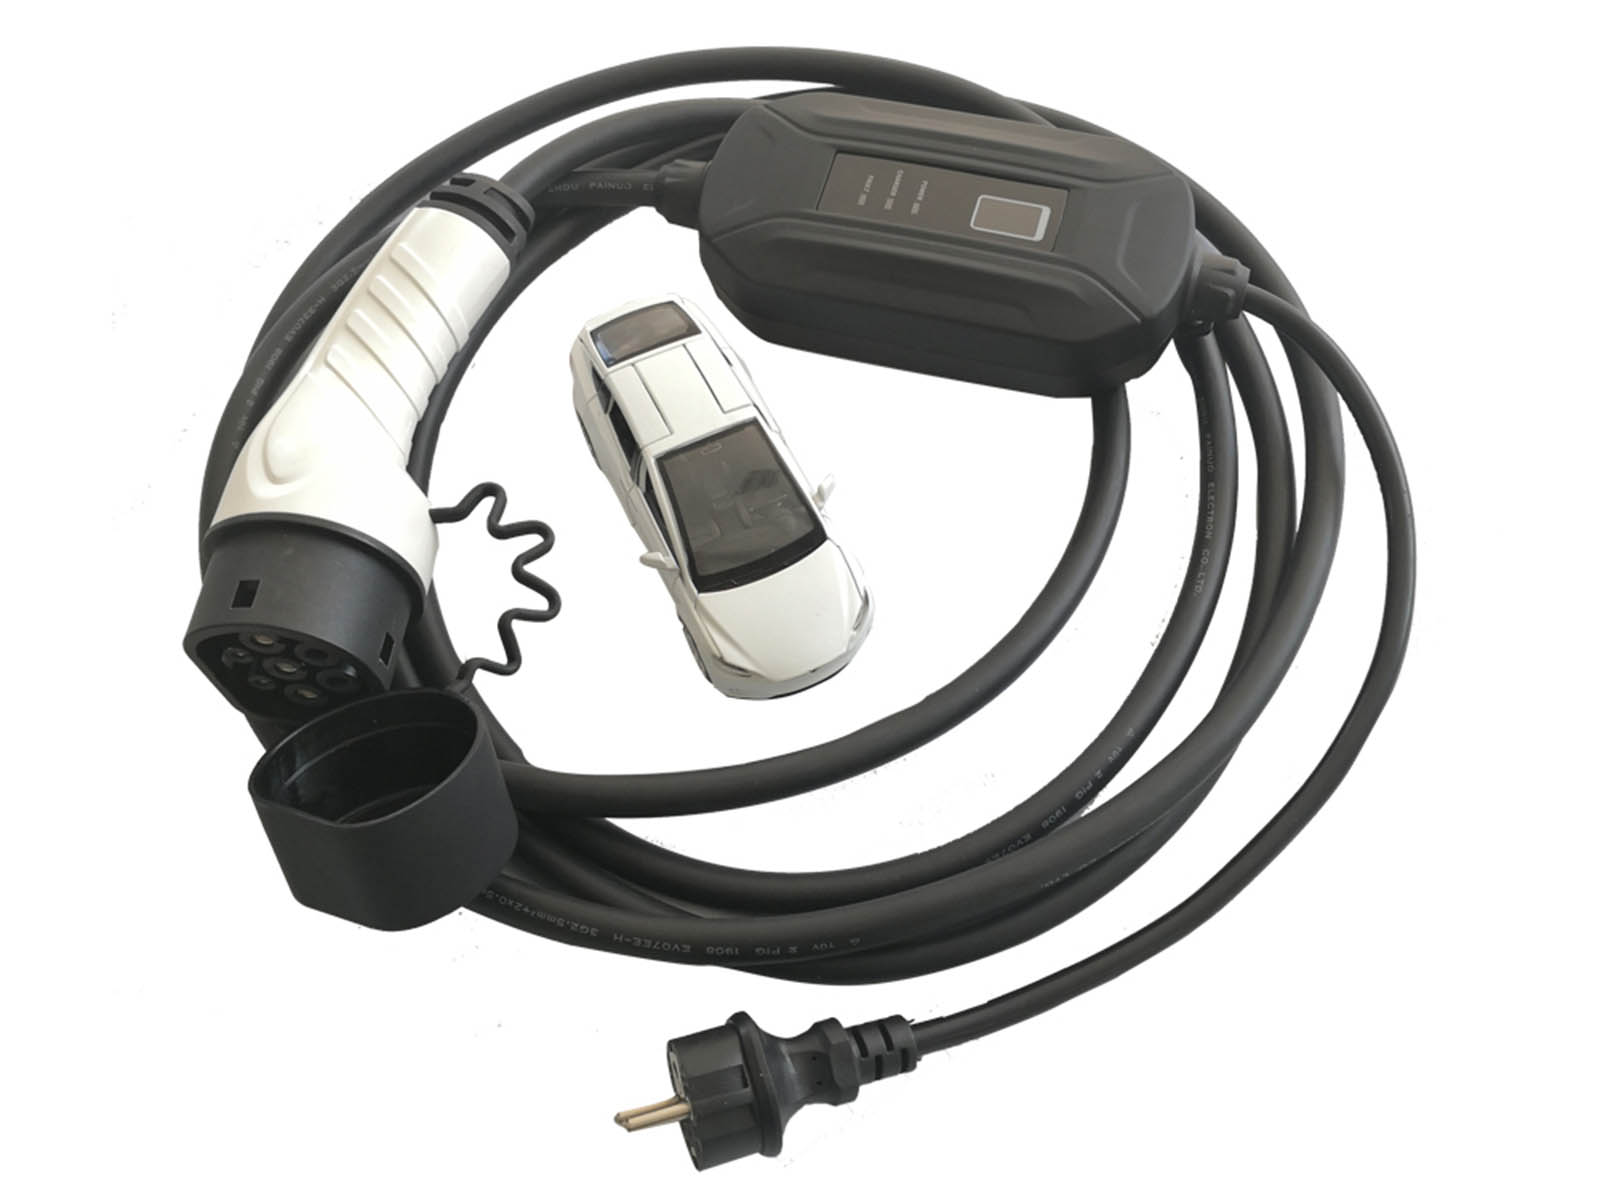 Premium EV charging cable for your electric car with type 2 socket